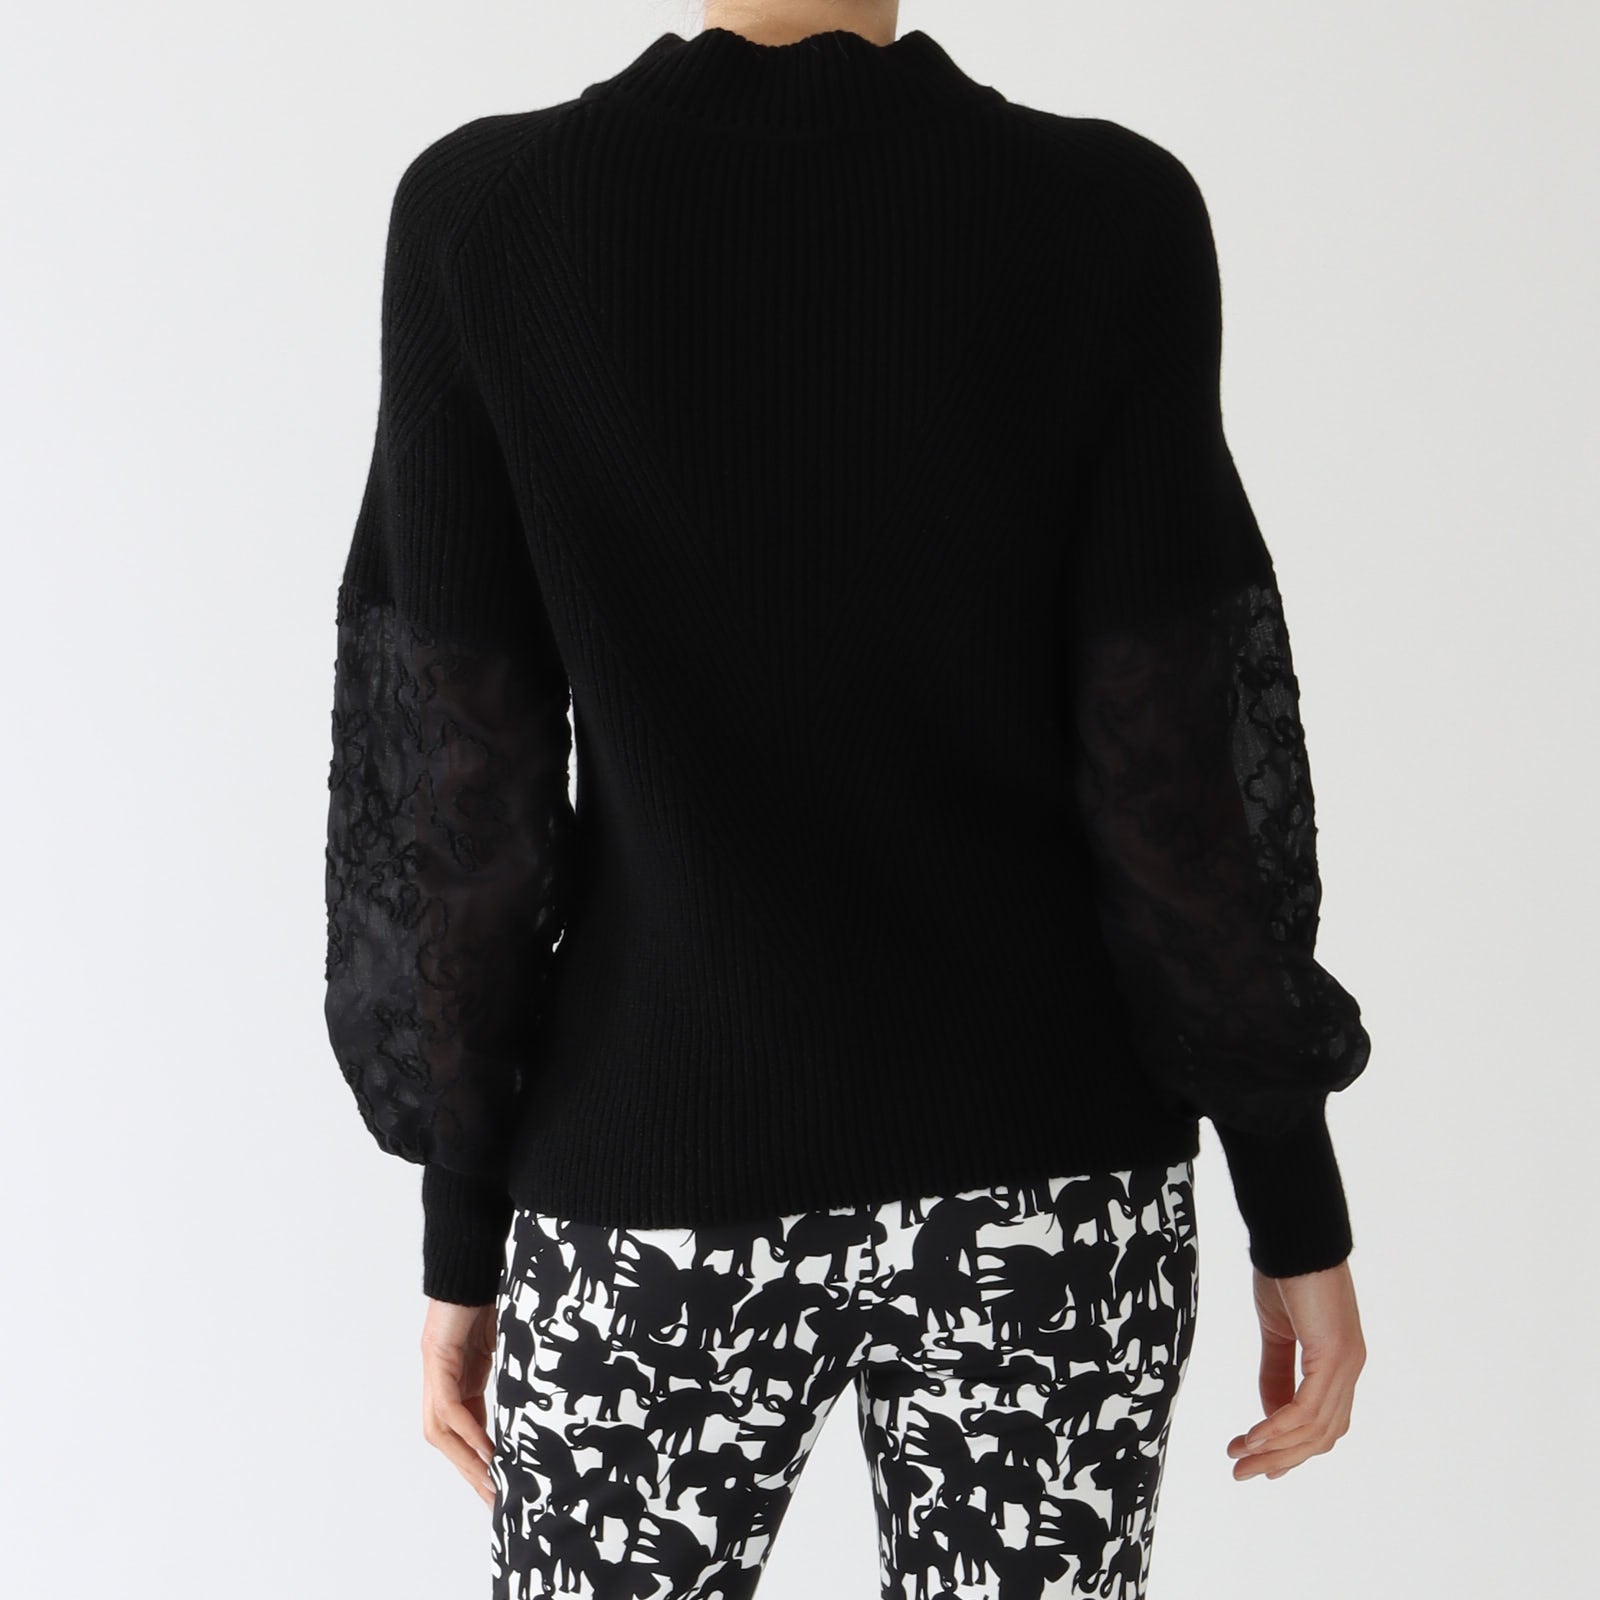 Black Cashmere Blend Sweater With Lace Inserts